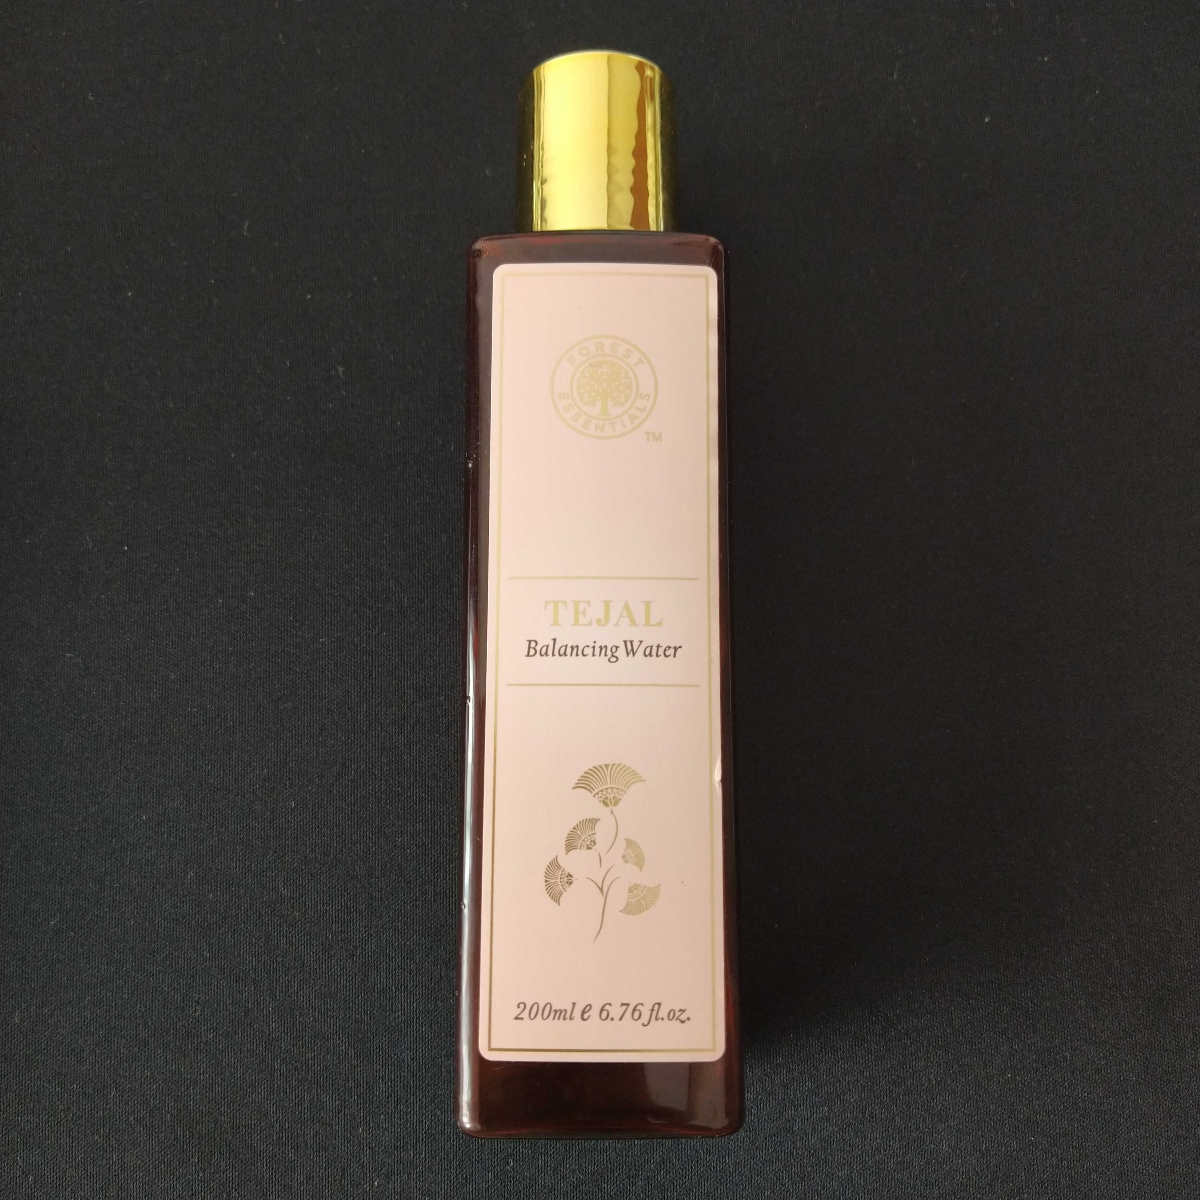 Forest essentials Tejal Balancing Water Reviews | abillion